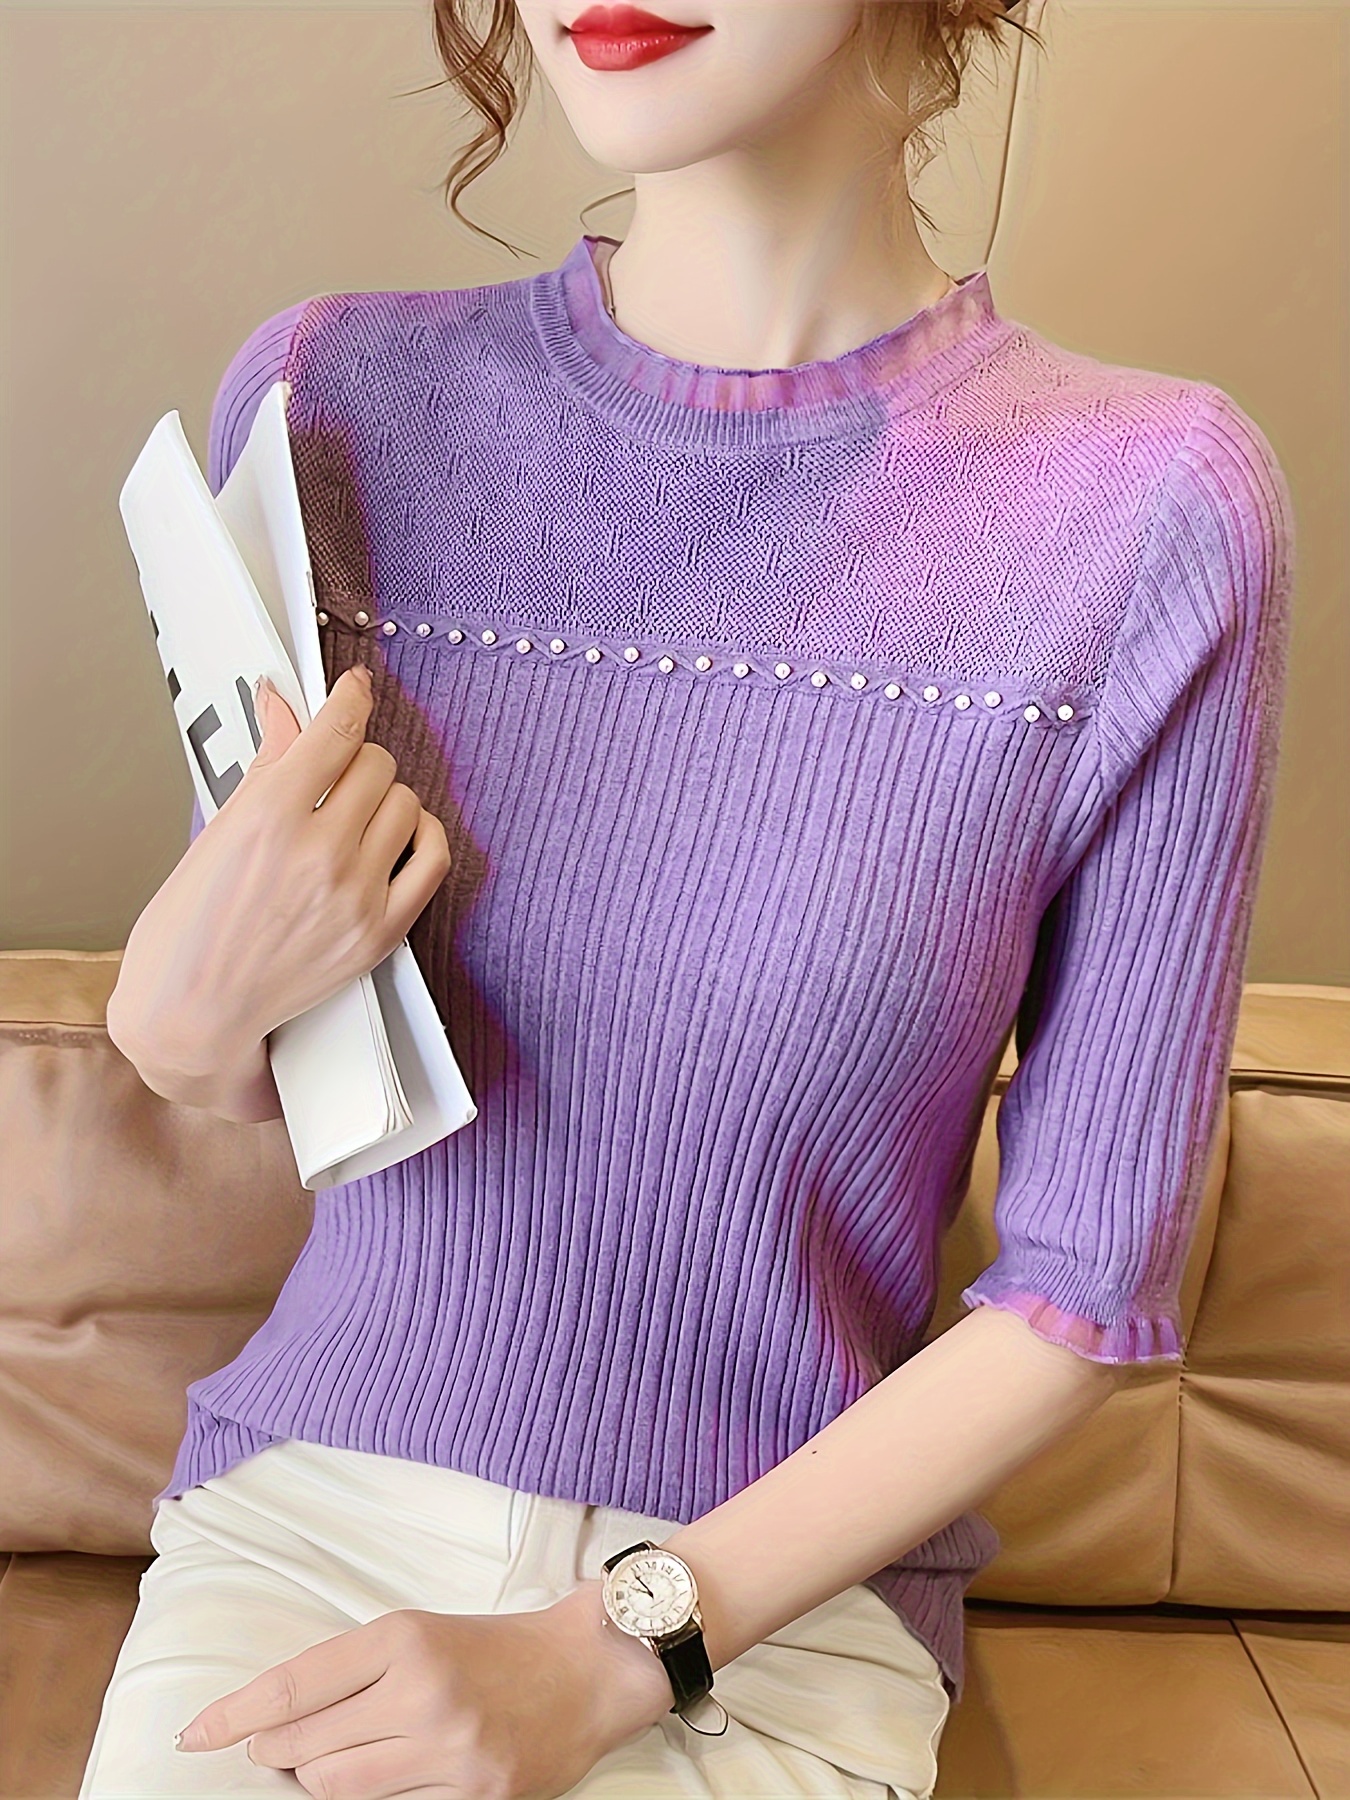 Beaded Lace Trin Knitted Top, Casual Short Sleeve Slim Sweater For Spring & Summer, Women's Clothing